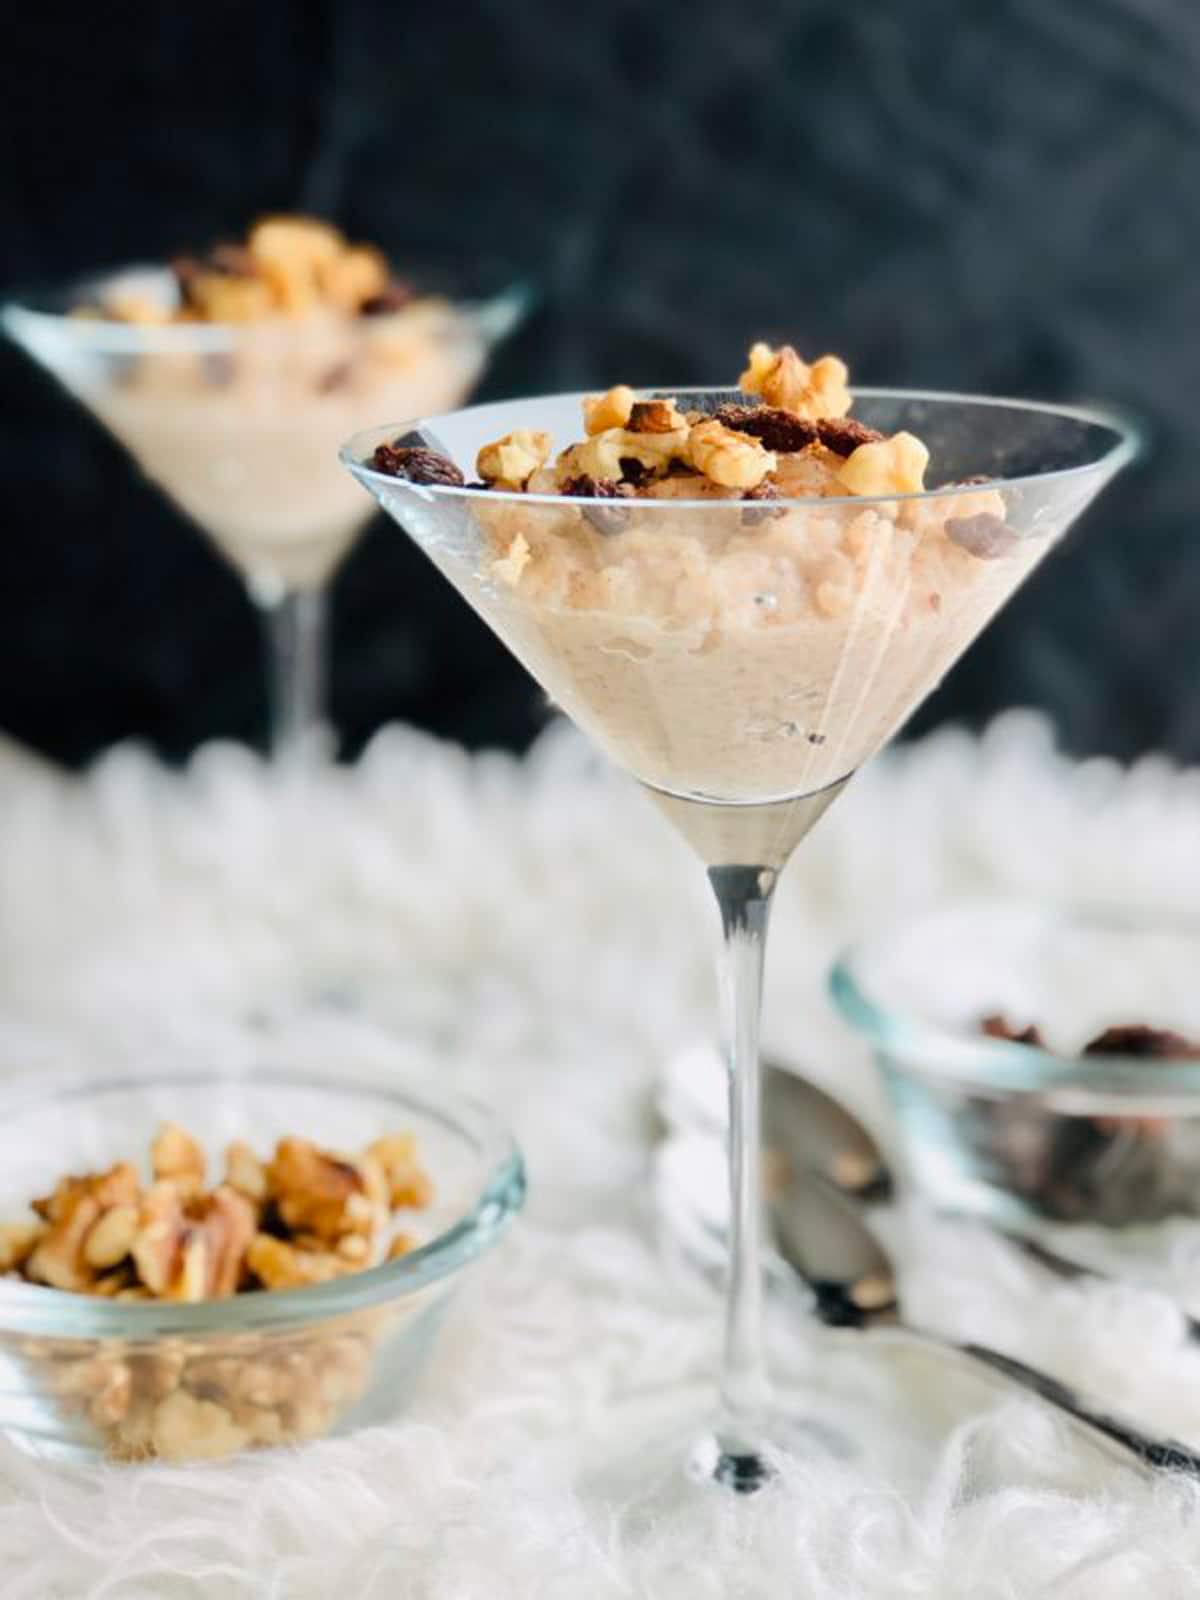 rice pudding topped with nuts in a martini glass. 